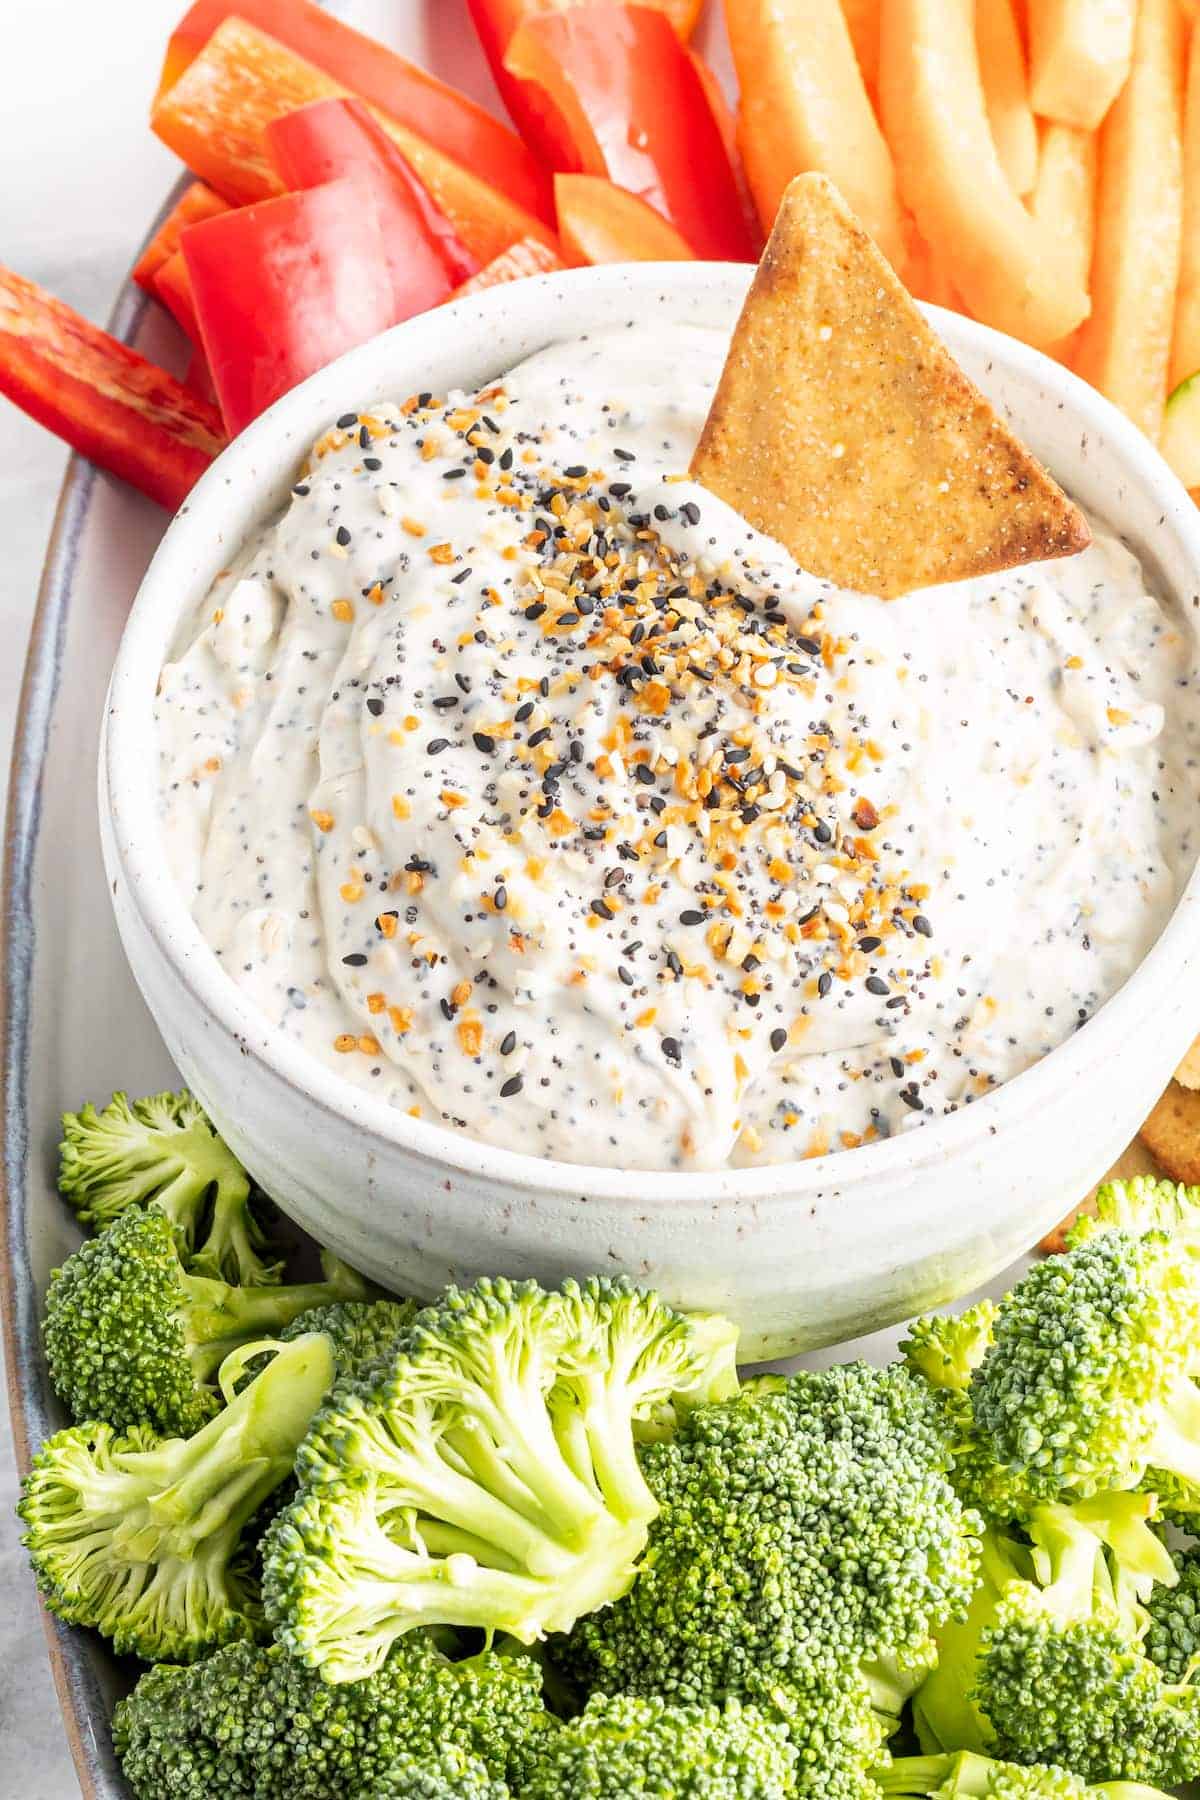 A white bowl containing everything bagel dip with pita chips, fresh broccoli, and bell peppers on a tray next to the bowl.